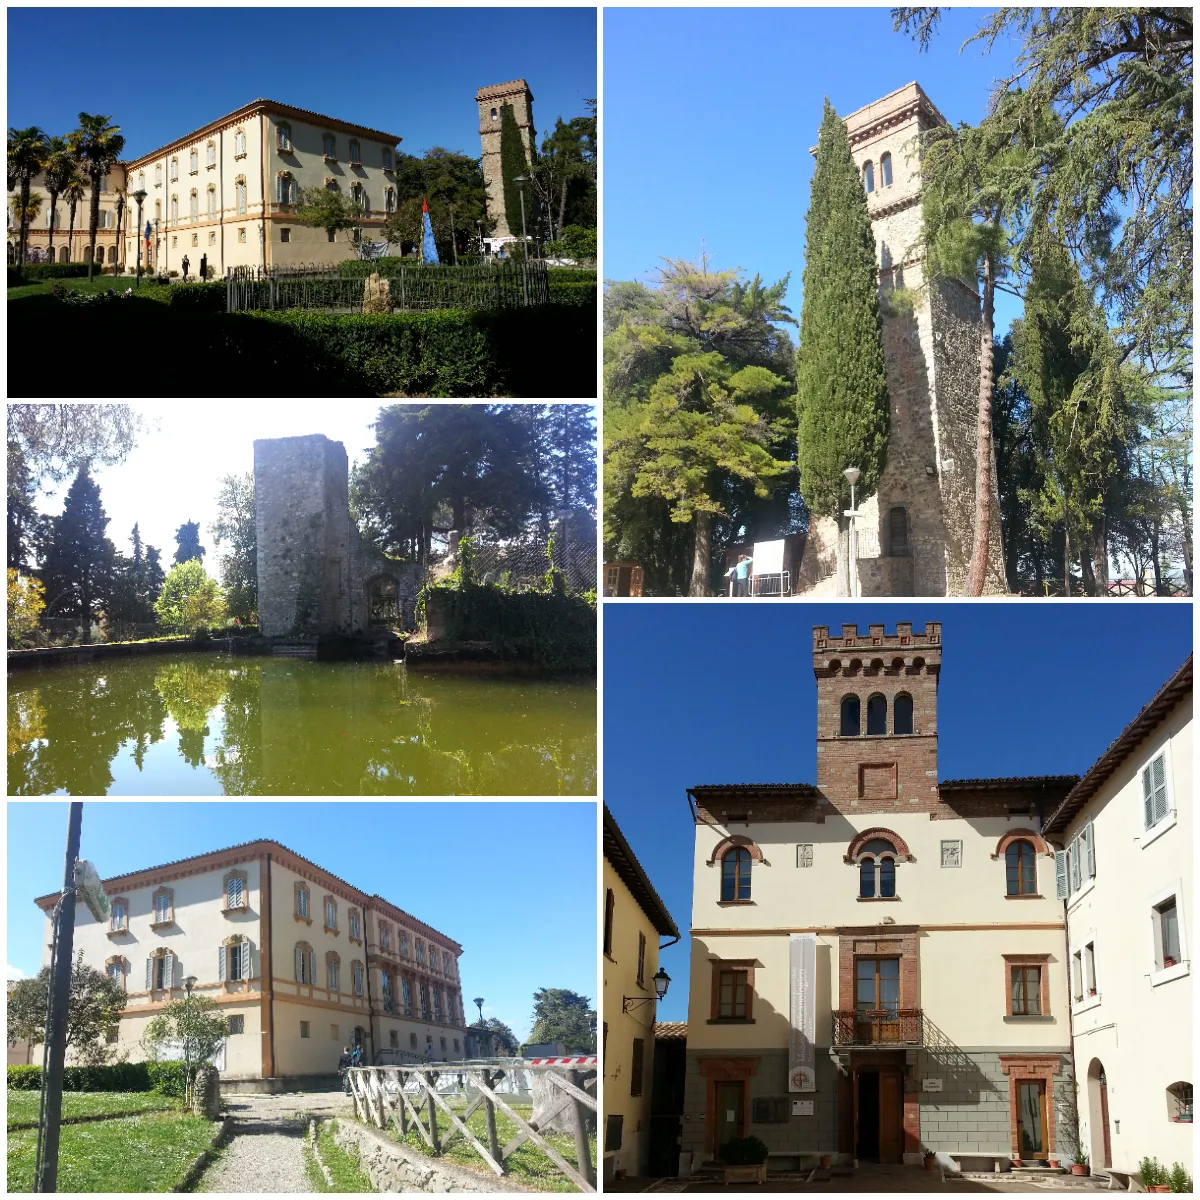 Photo showing: Palazzo comunale, stagno medievale, torre, museo cittadino